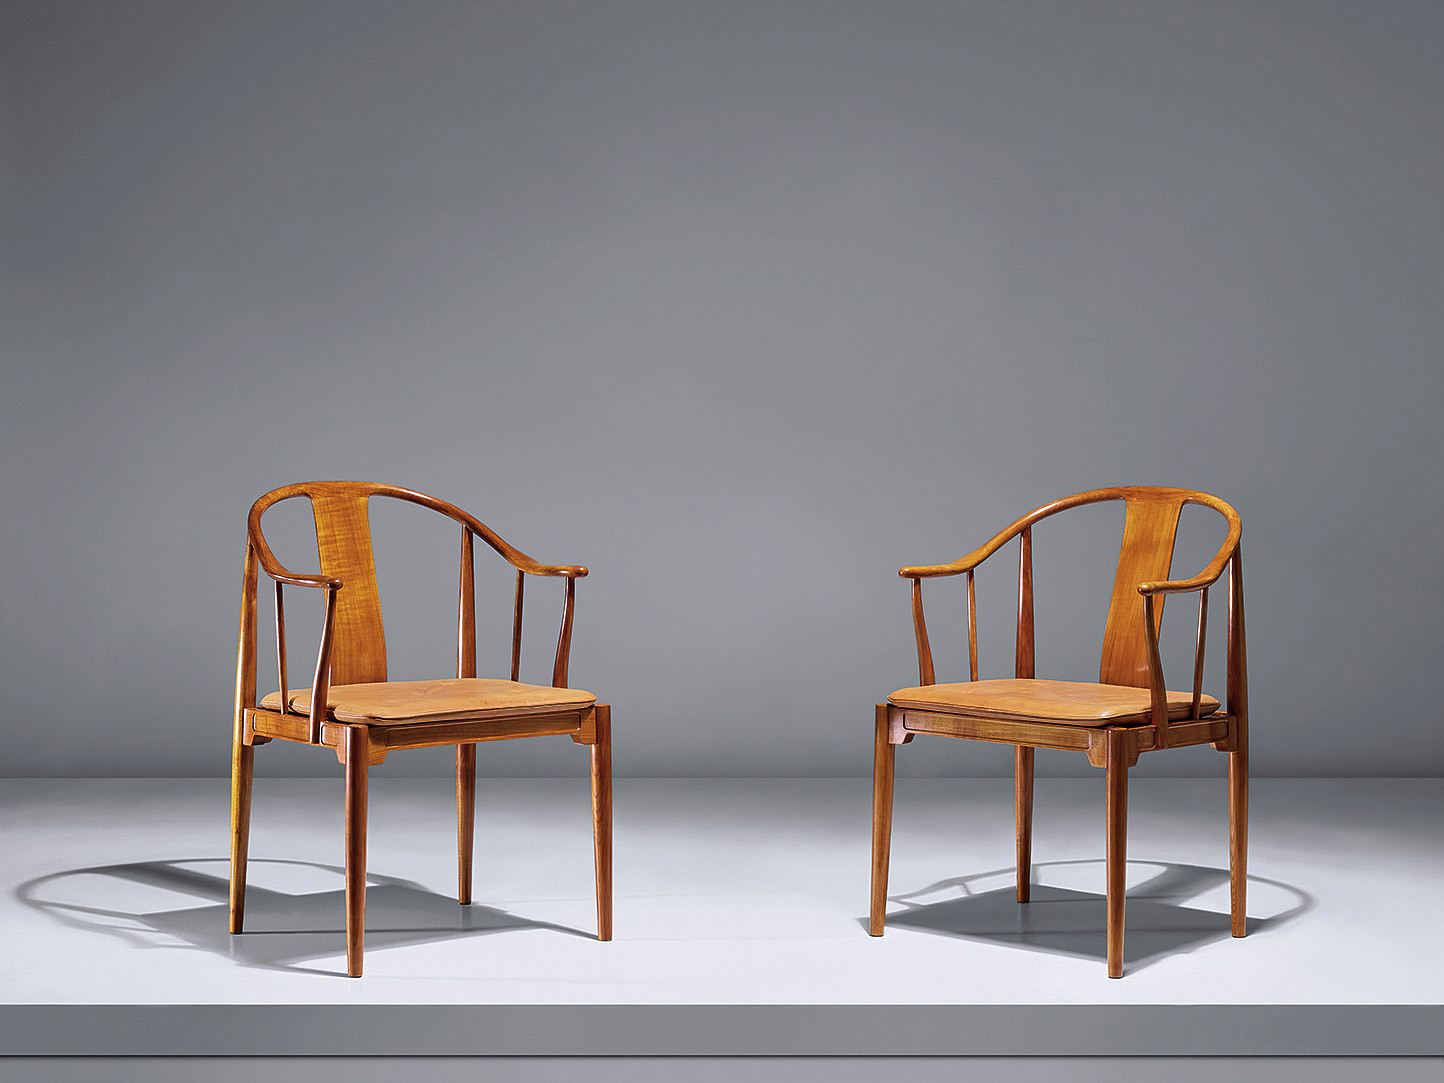 Pair of ‘Chinese’ armchairs, model no. 4283